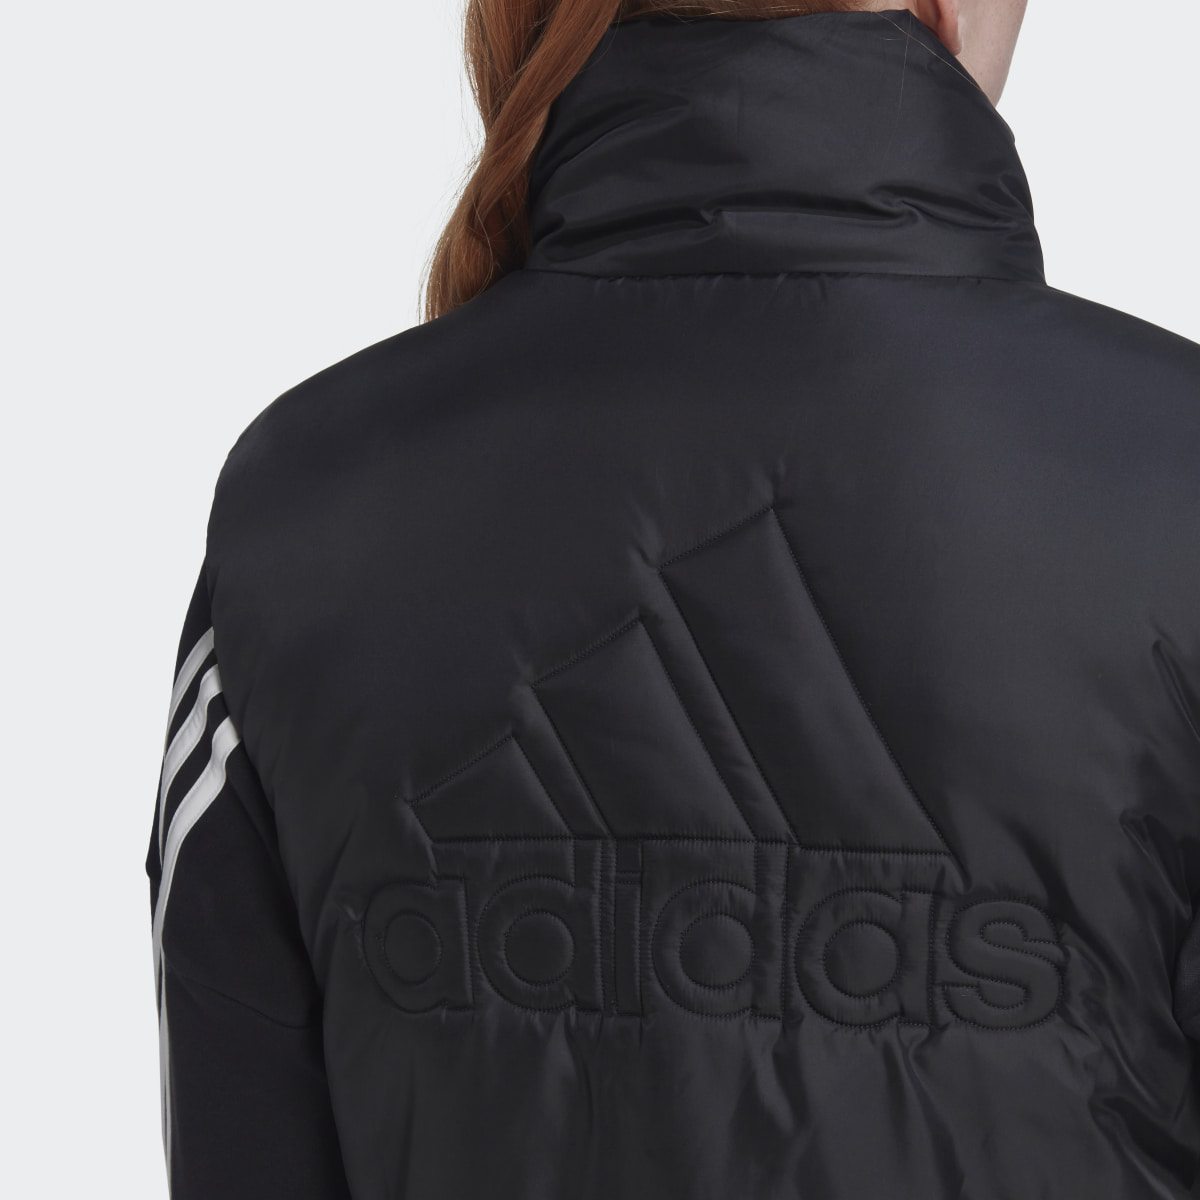 Adidas 3-Stripes Insulated Vest. 7